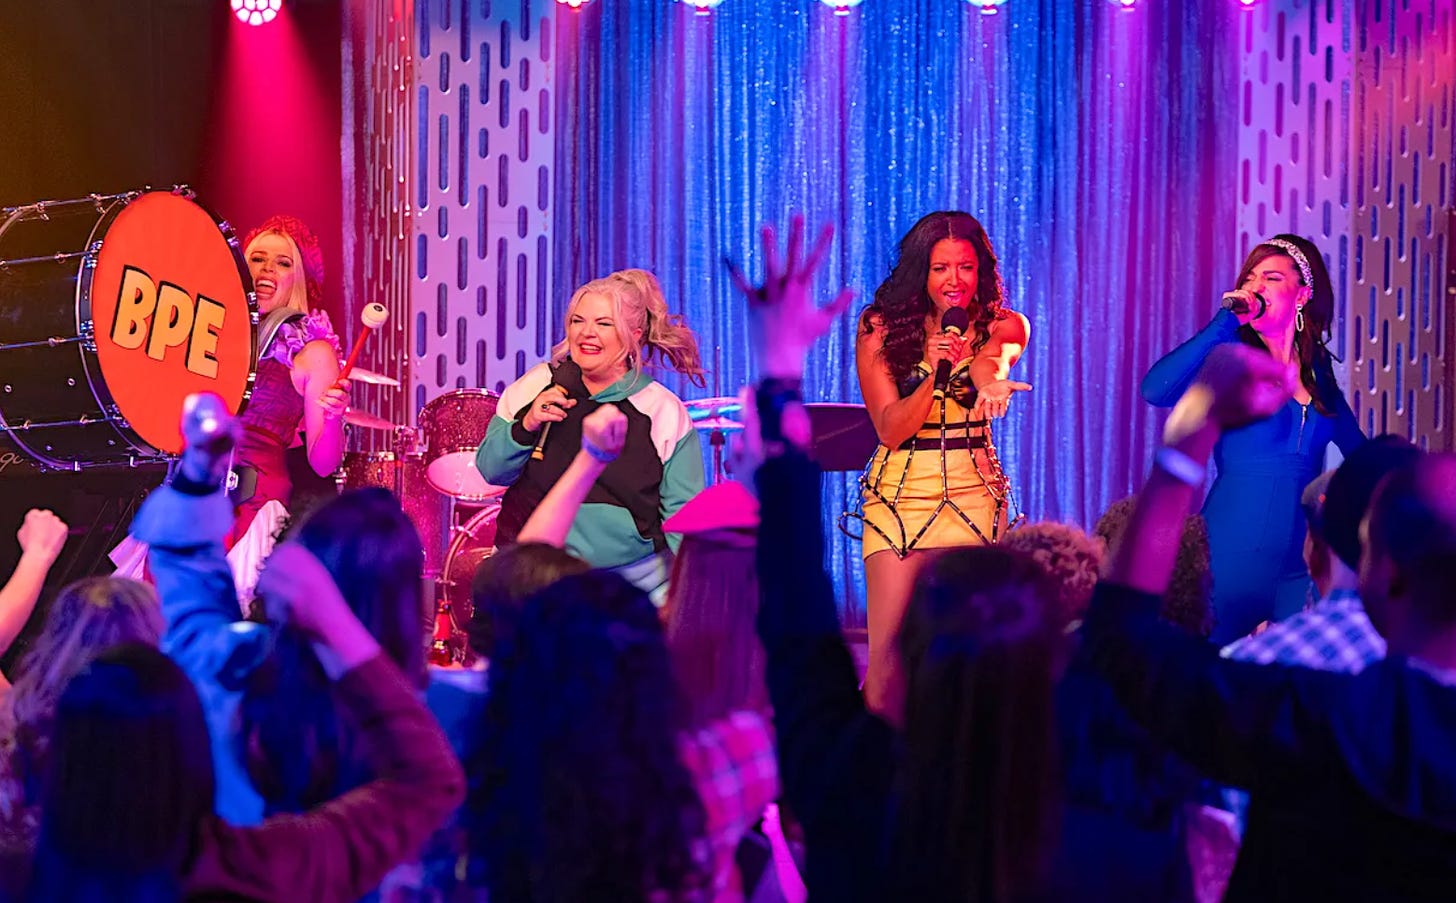 Busy Philipps, Paula Pell, Renee Elise Goldsberry and Sara Bareilles in Girls5eva, performing a pop concernt on stage in brightly colored attire